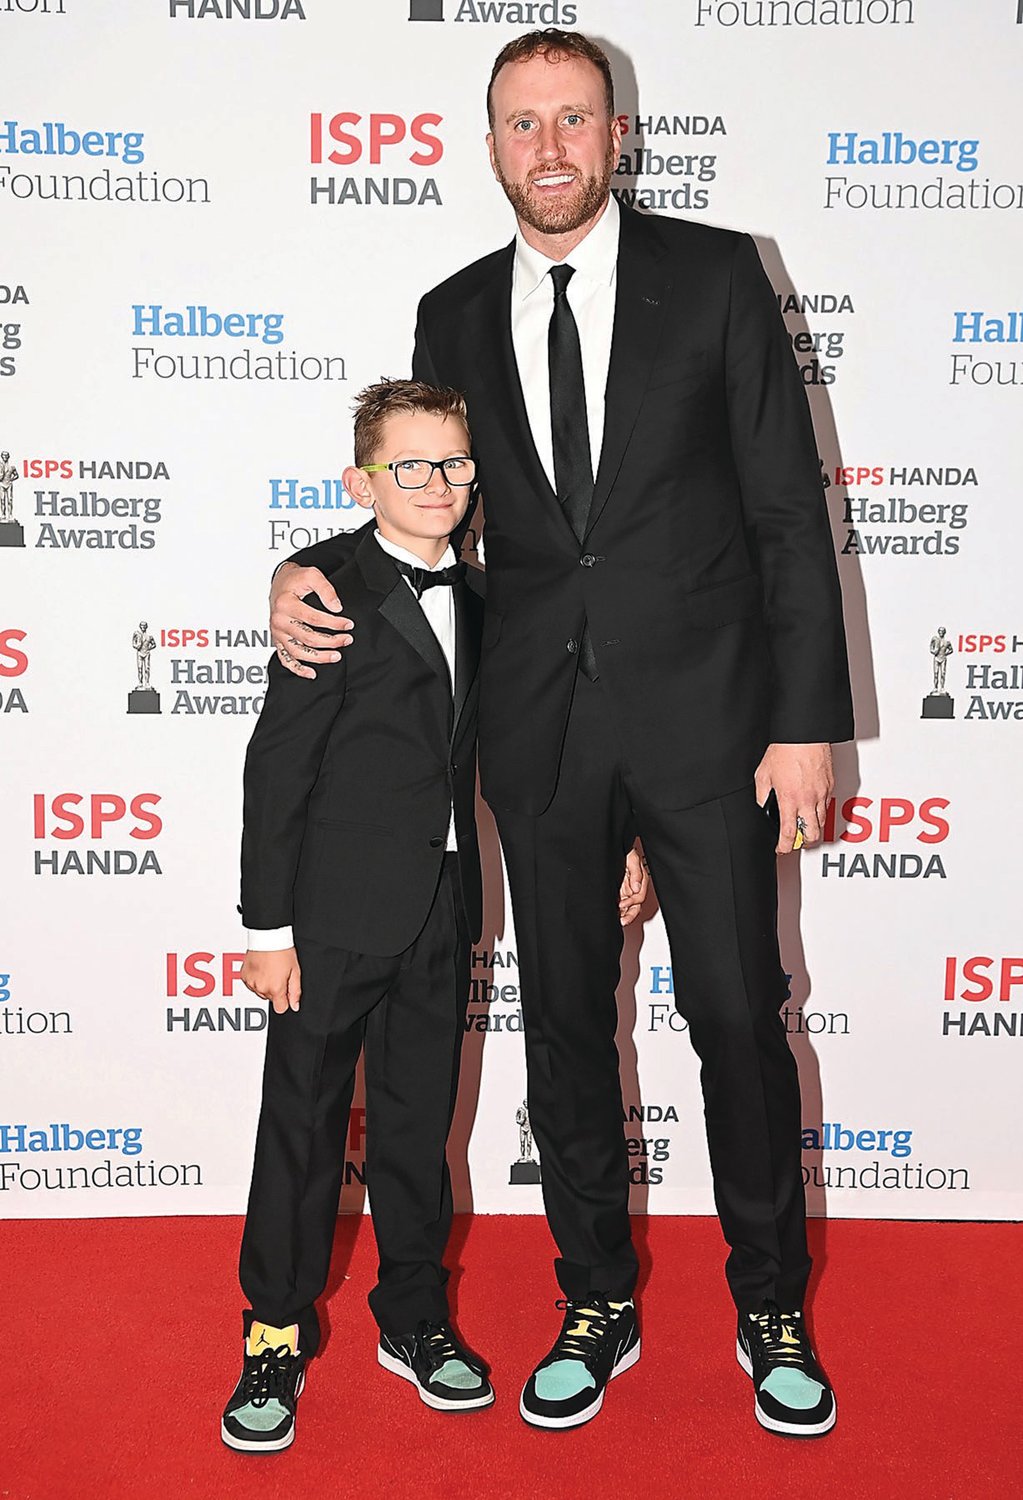 Bucks County native Matt Walsh and his son attend the Halberg Awards, New Zealand’s biggest annual sports recognition event.